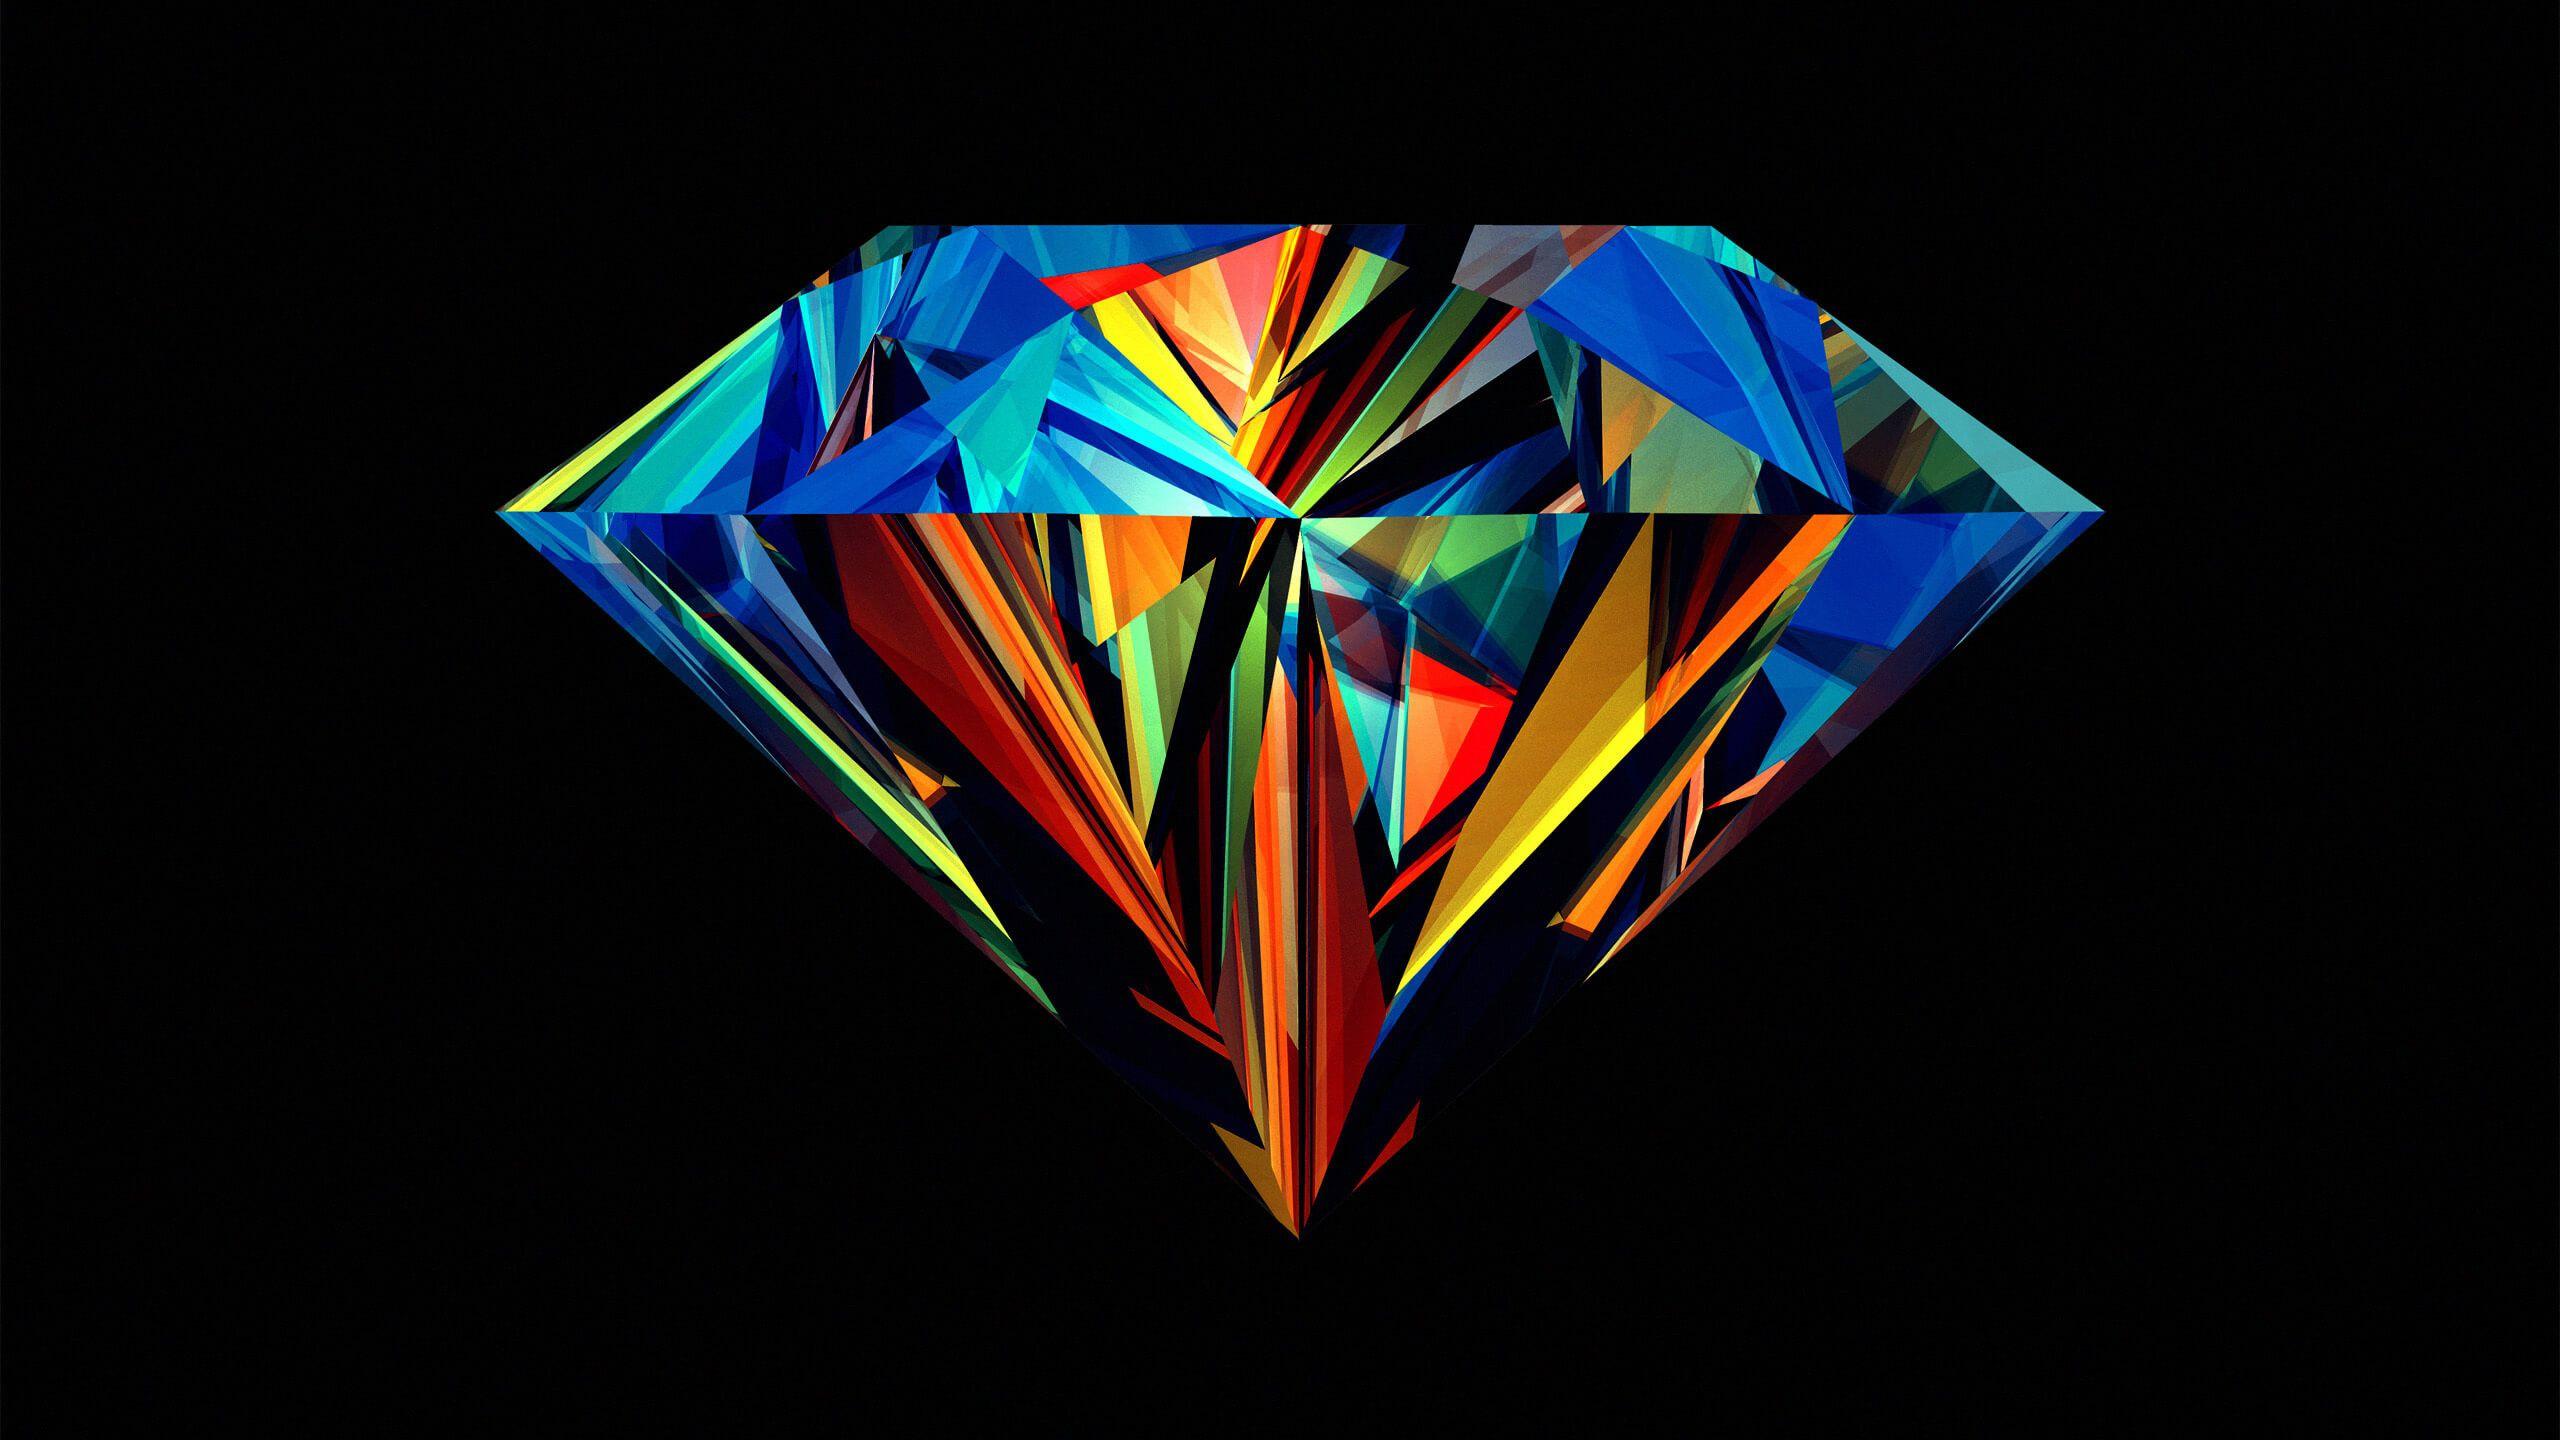 Colorful Diamond HD wallpaper for Youtube Channel Art .x1152 wallpaper, Diamond wallpaper, Abstract